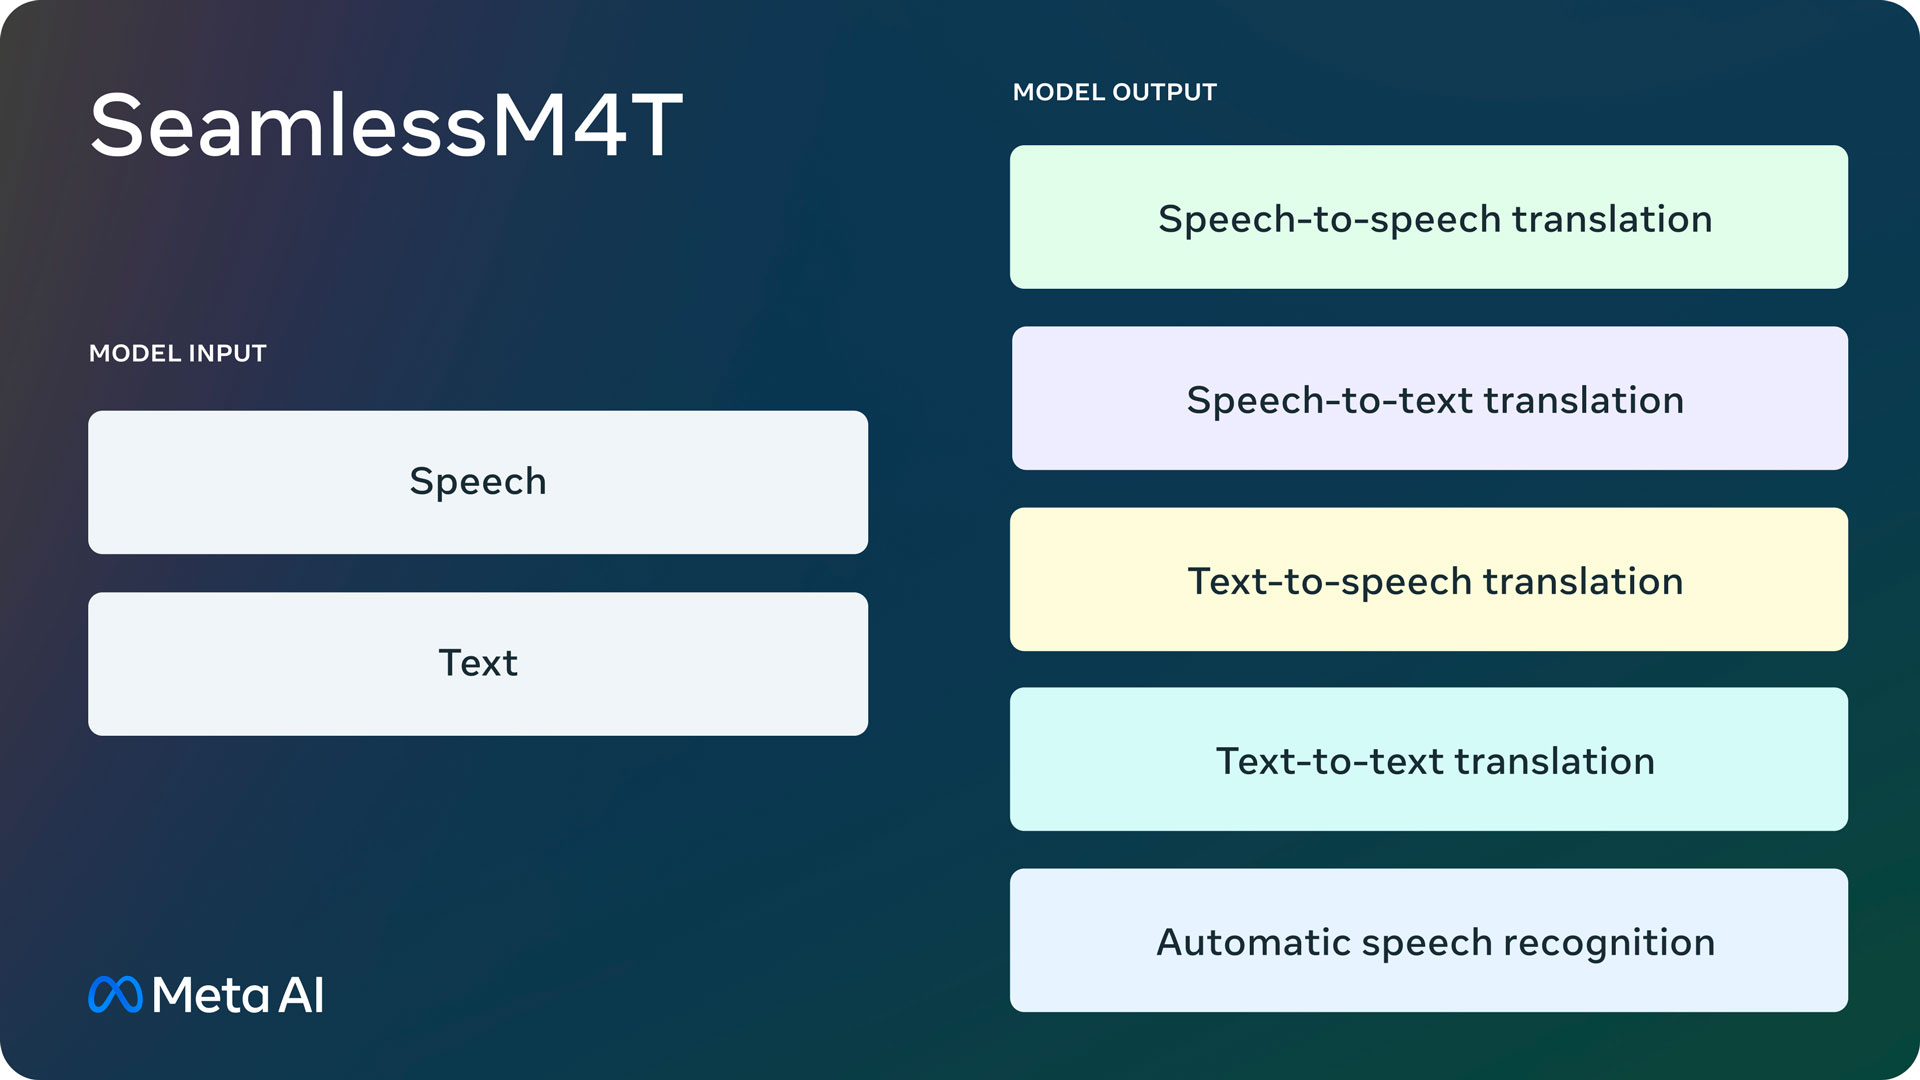 Meta has launched the Seamless M4T artificial intelligence model that translates text and speech into 100 languages